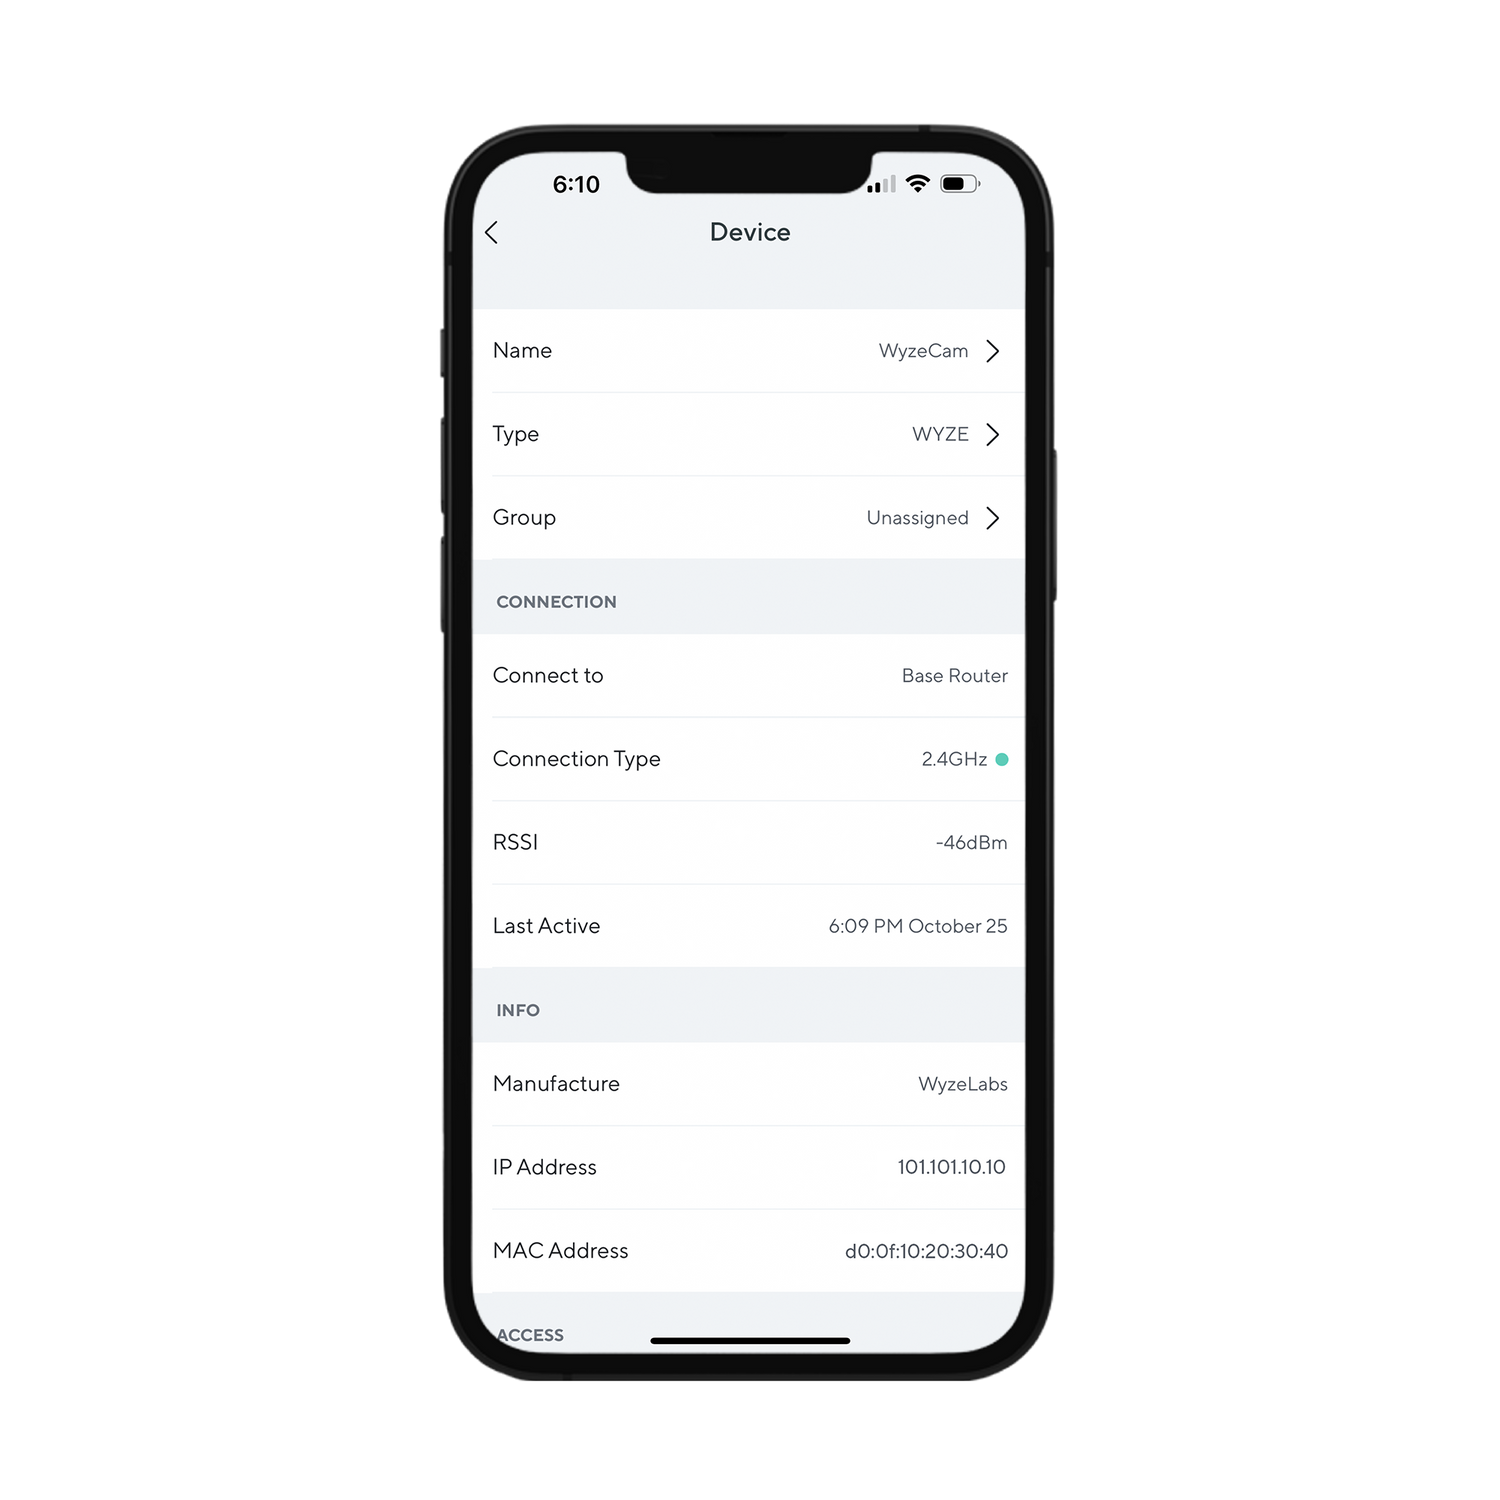 The device screen lets you view and manage connected devices.